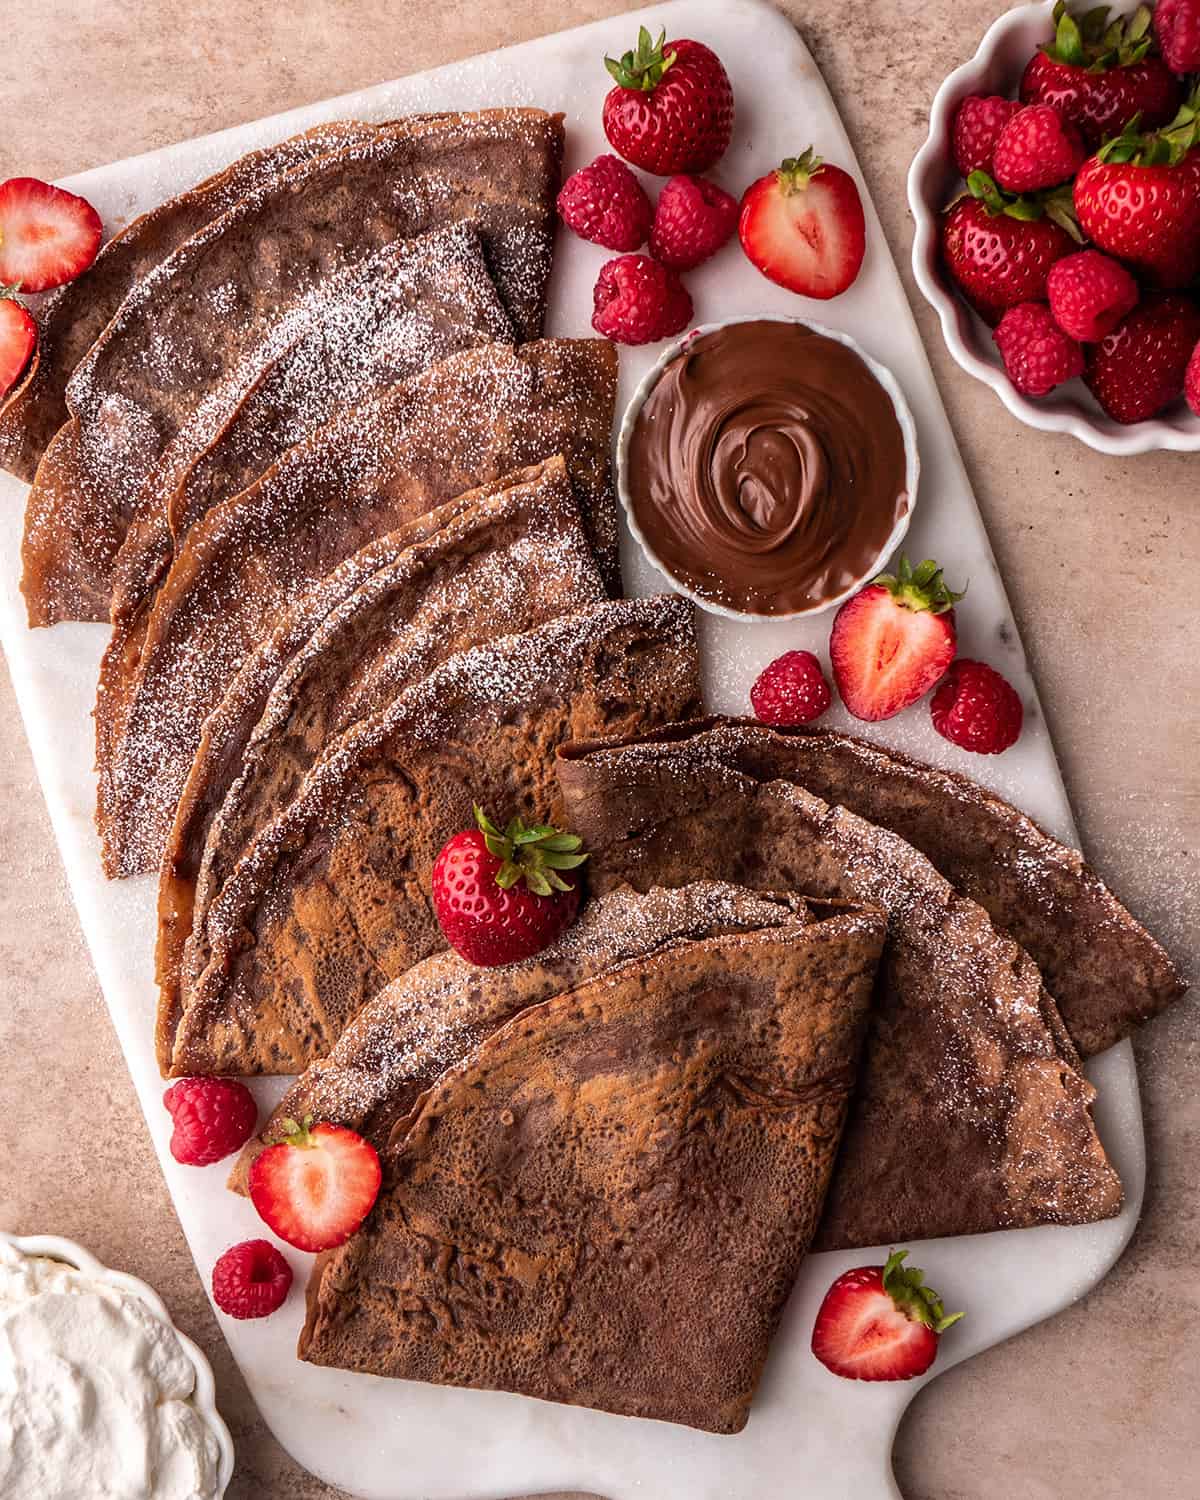 6 Chocolate Crepes folded into triangles on a plate with berries and powdered sugar on a serving platter